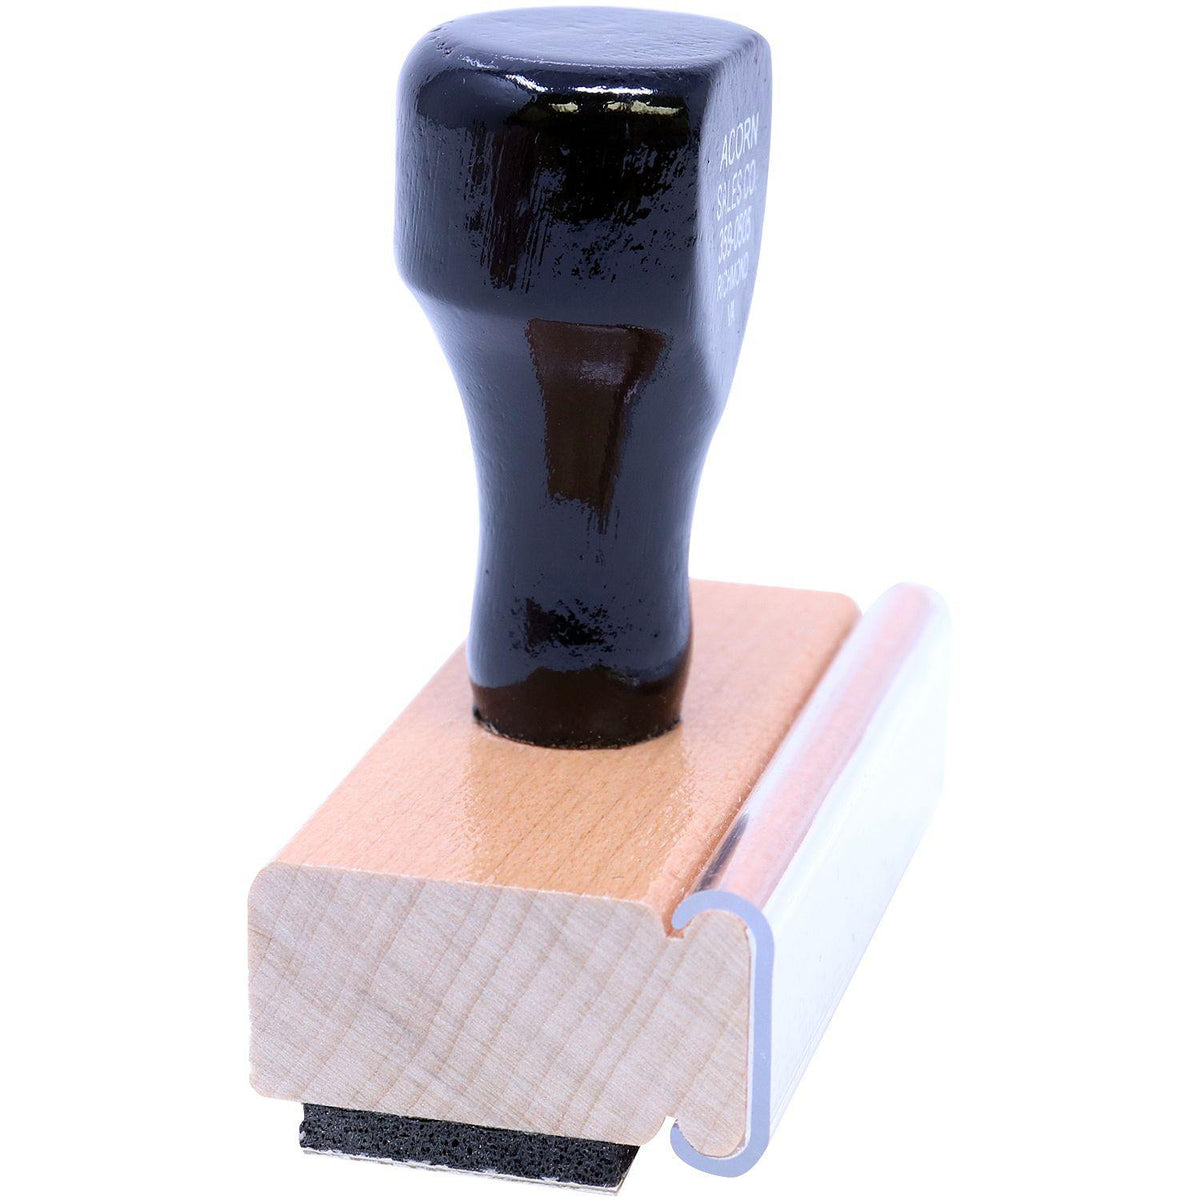 Side View of Covid-19 Tested Rubber Stamp at an Angle